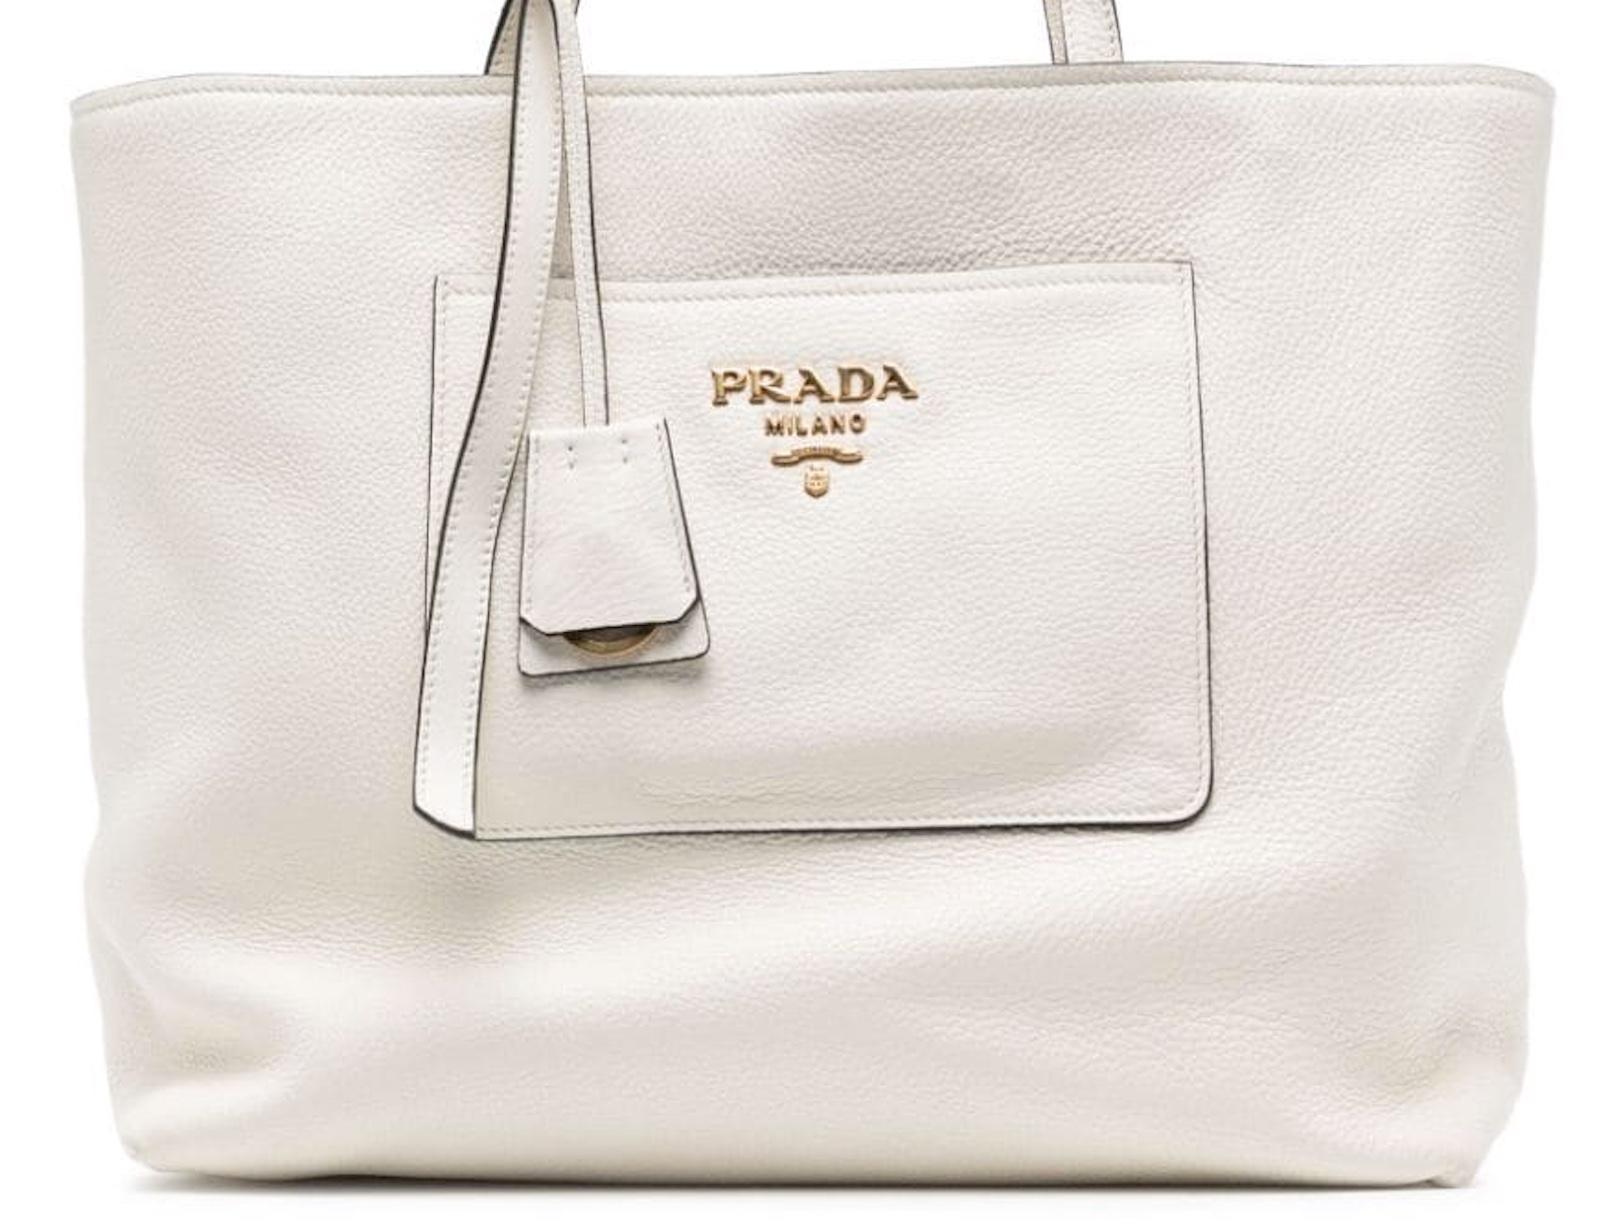 Prada Oxygen Vitello Leather Front Pocket Tote In Good Condition For Sale In London, GB